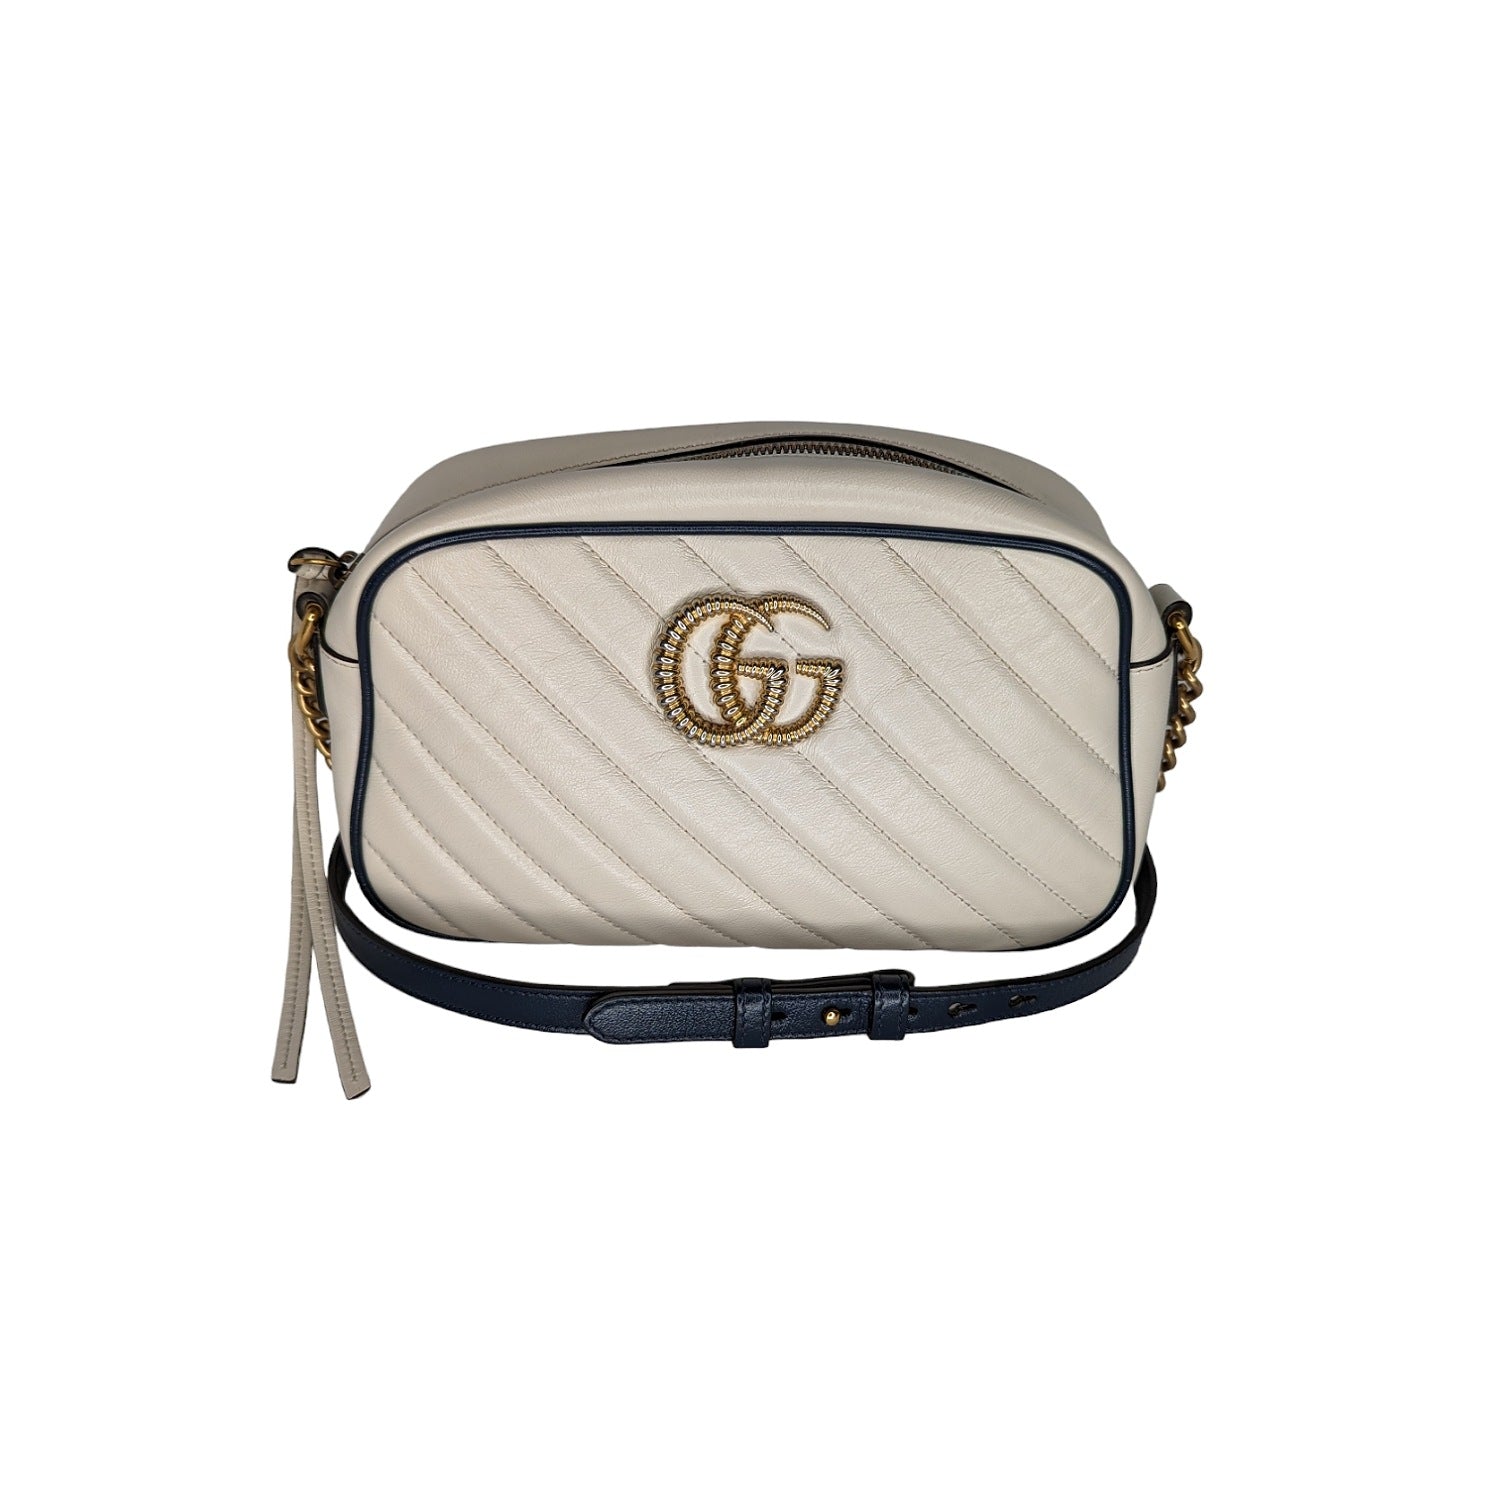 Gucci Deco small shoulder bag in off white leather